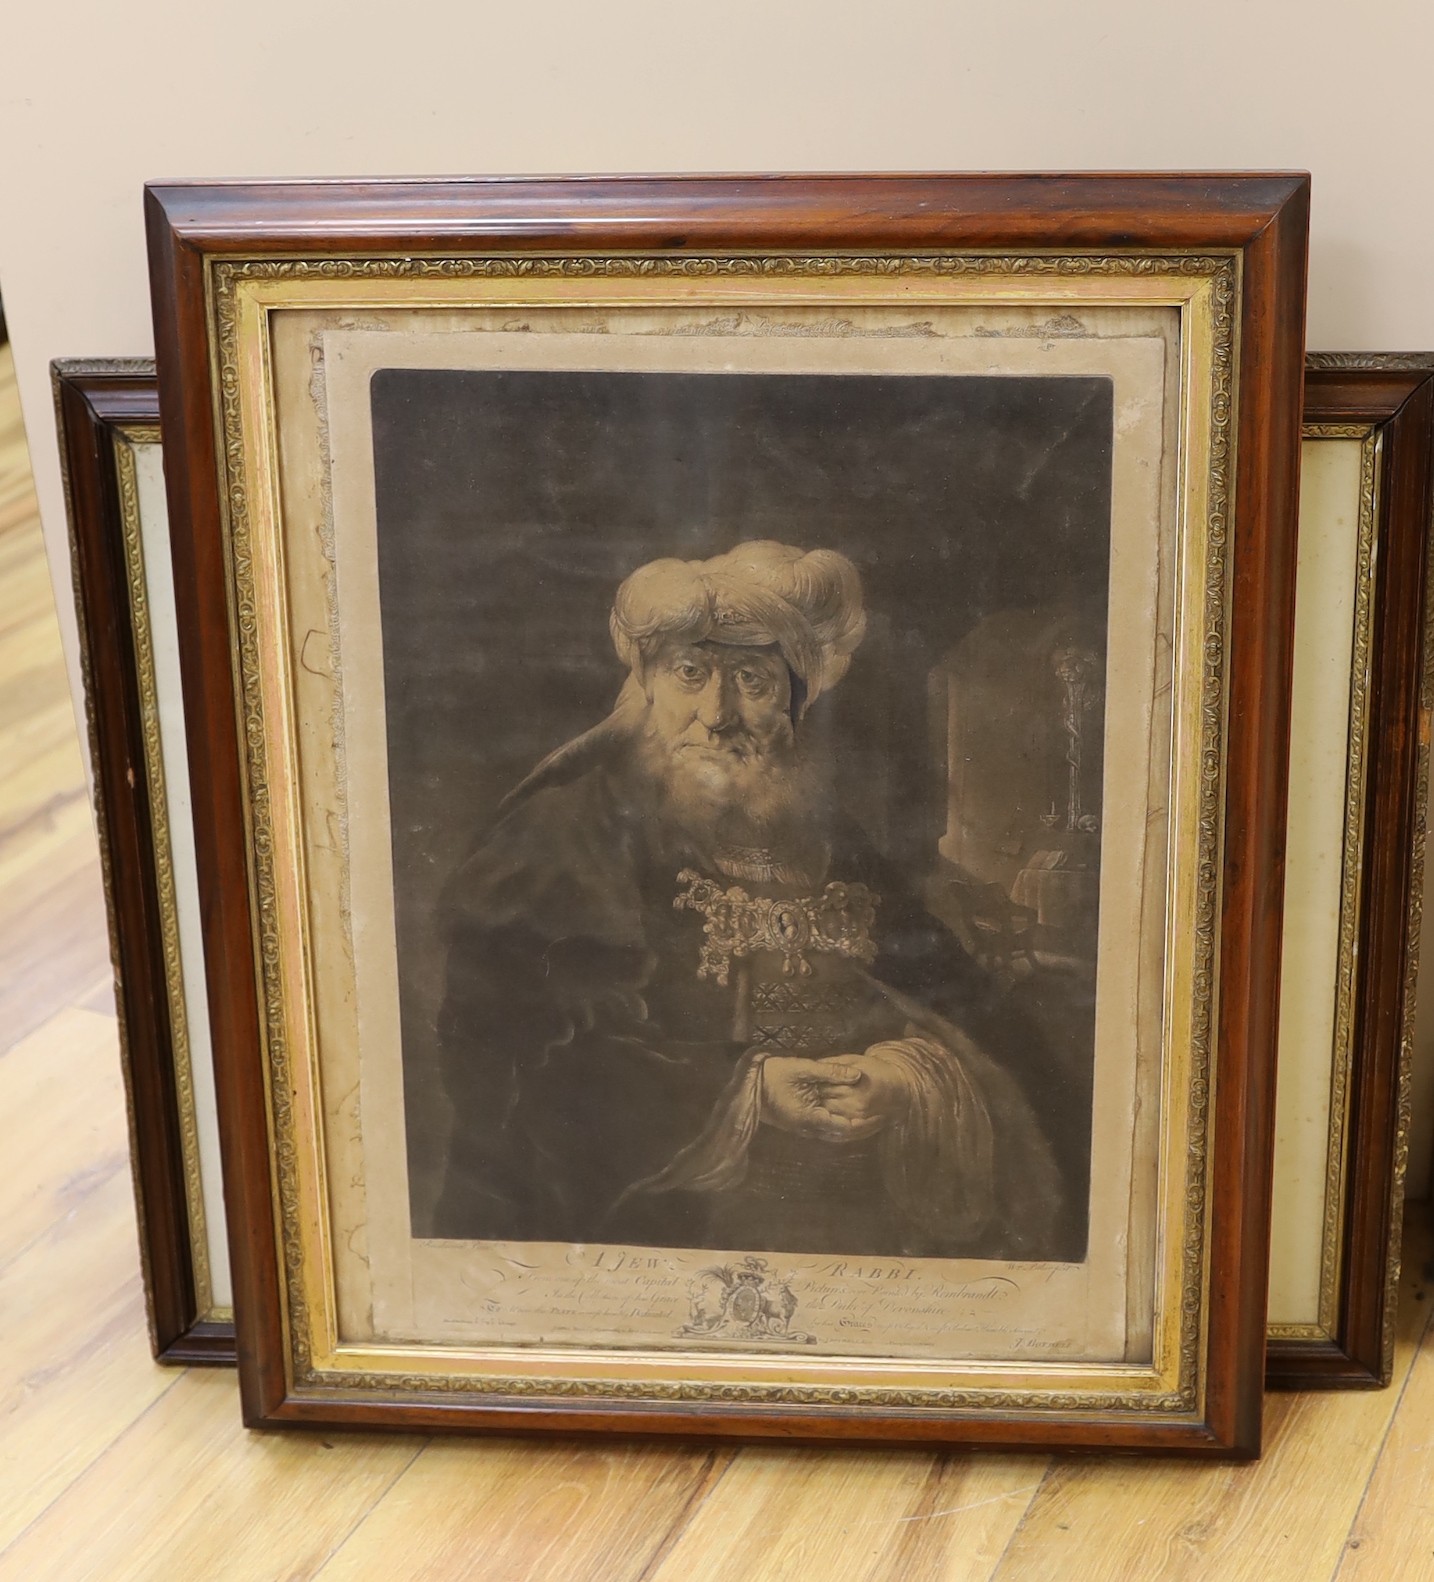 William Pether after Rembrandt, mezzotint, 'A Jew Rabbi', overall 53 x 39cm, another mezzotint after Rembrandt by McArdell and a pair of engravings of woodlanders